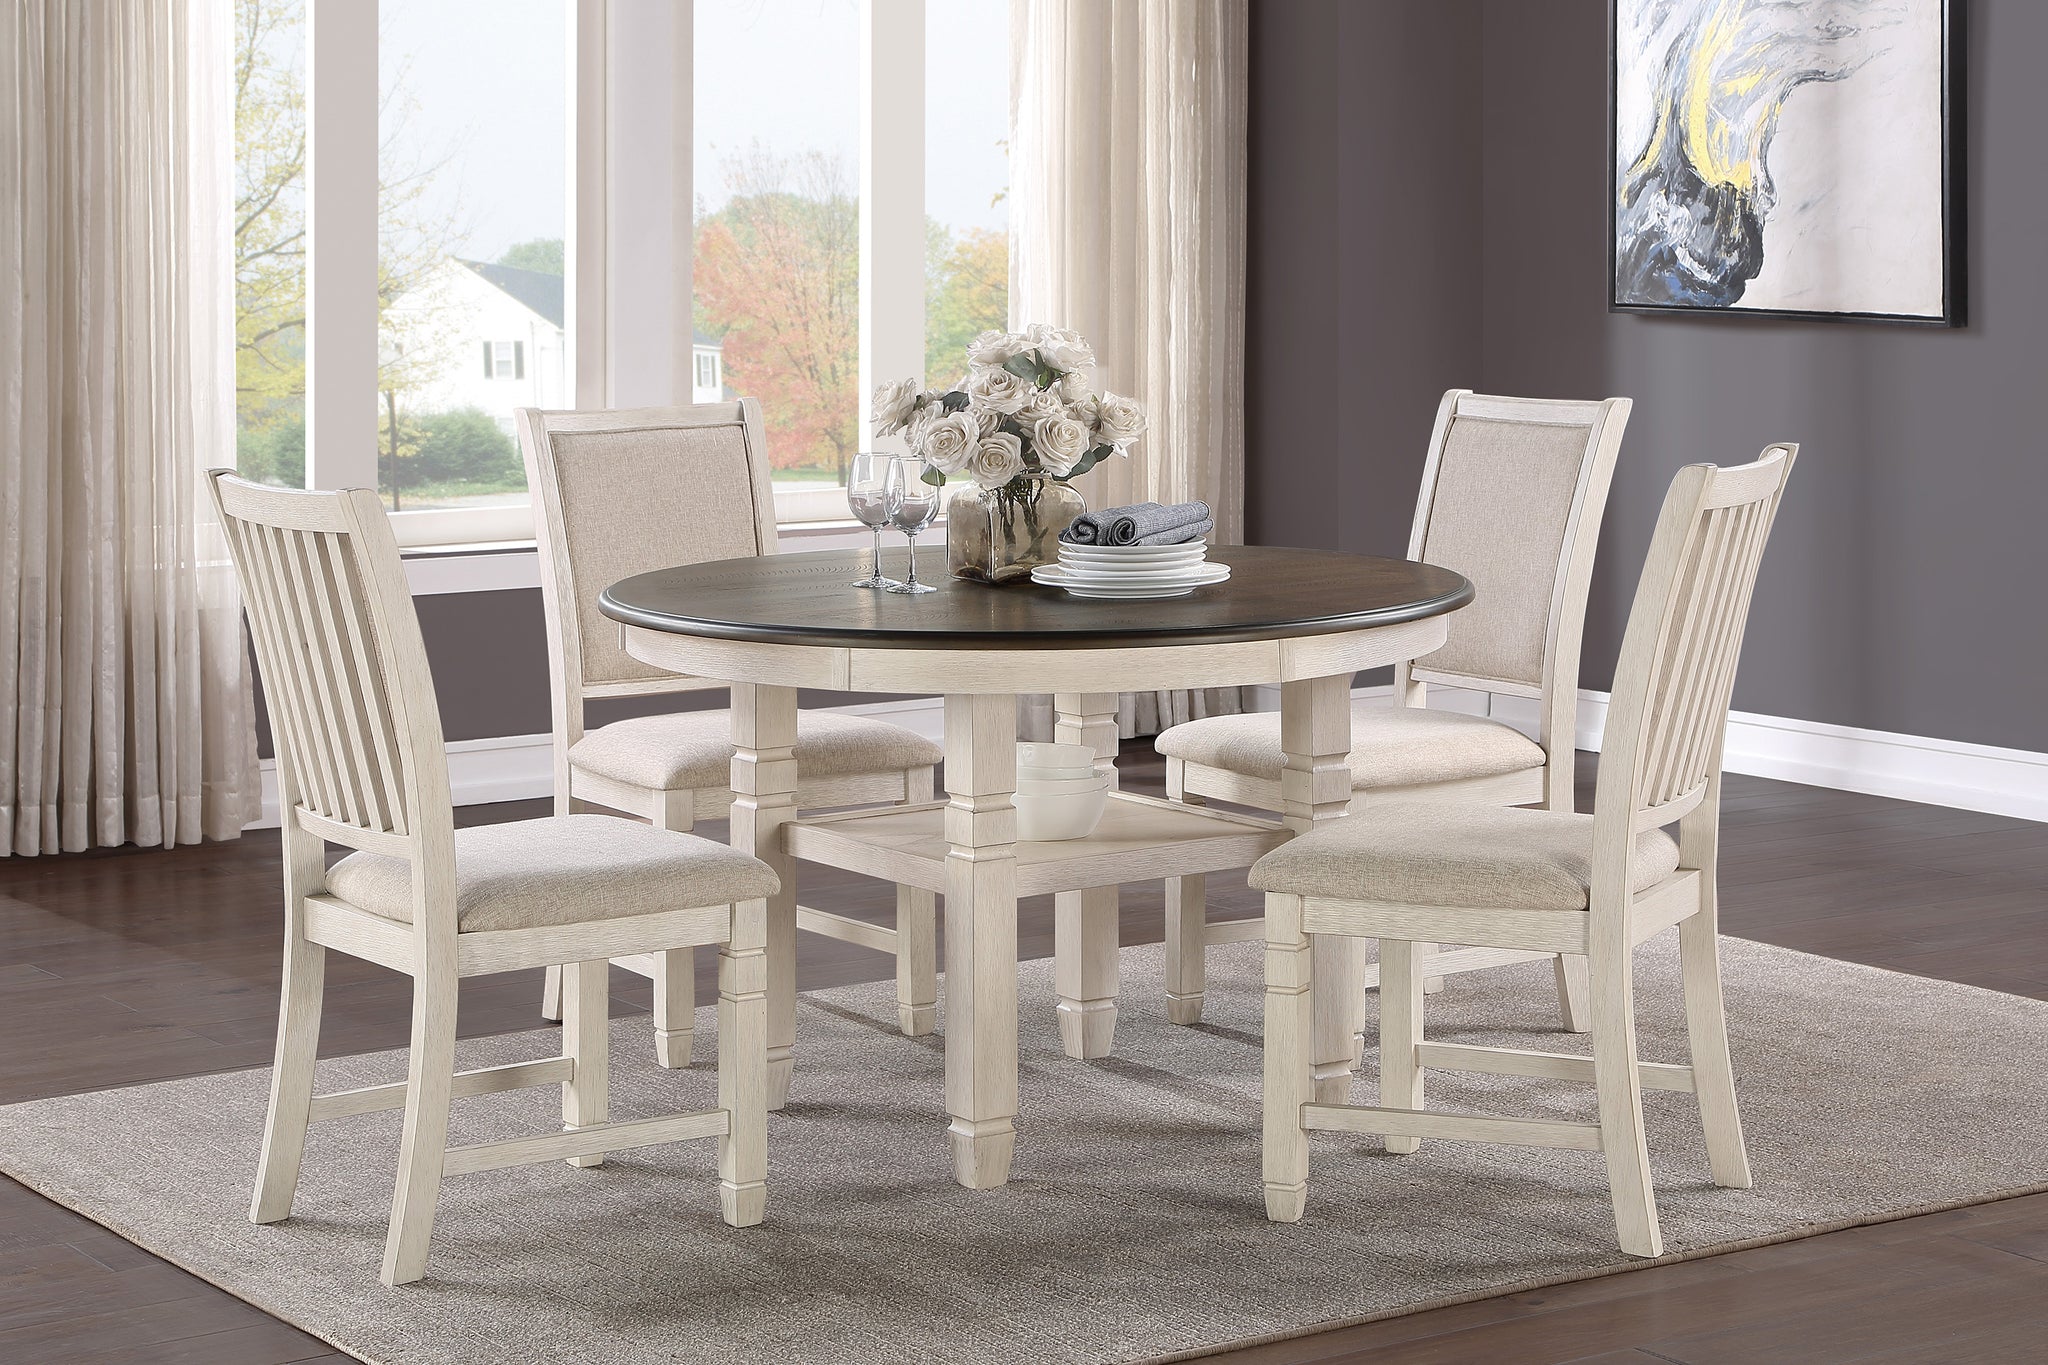 Asher Dining Set in Antique White